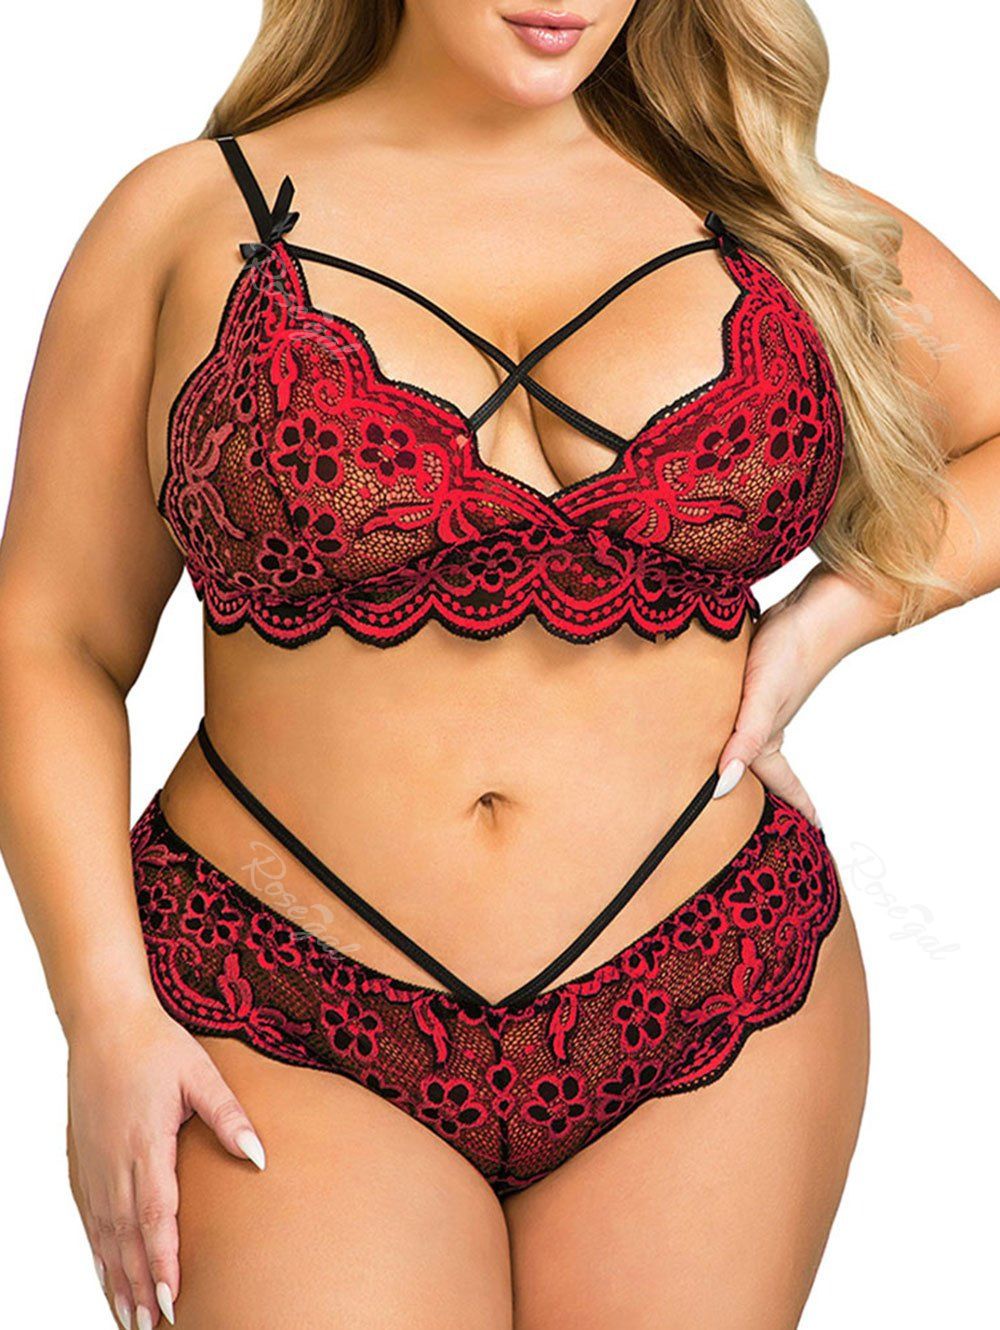 Affordable Plus Size Lace Cross Sheer Scalloped Trim Bralette Set  